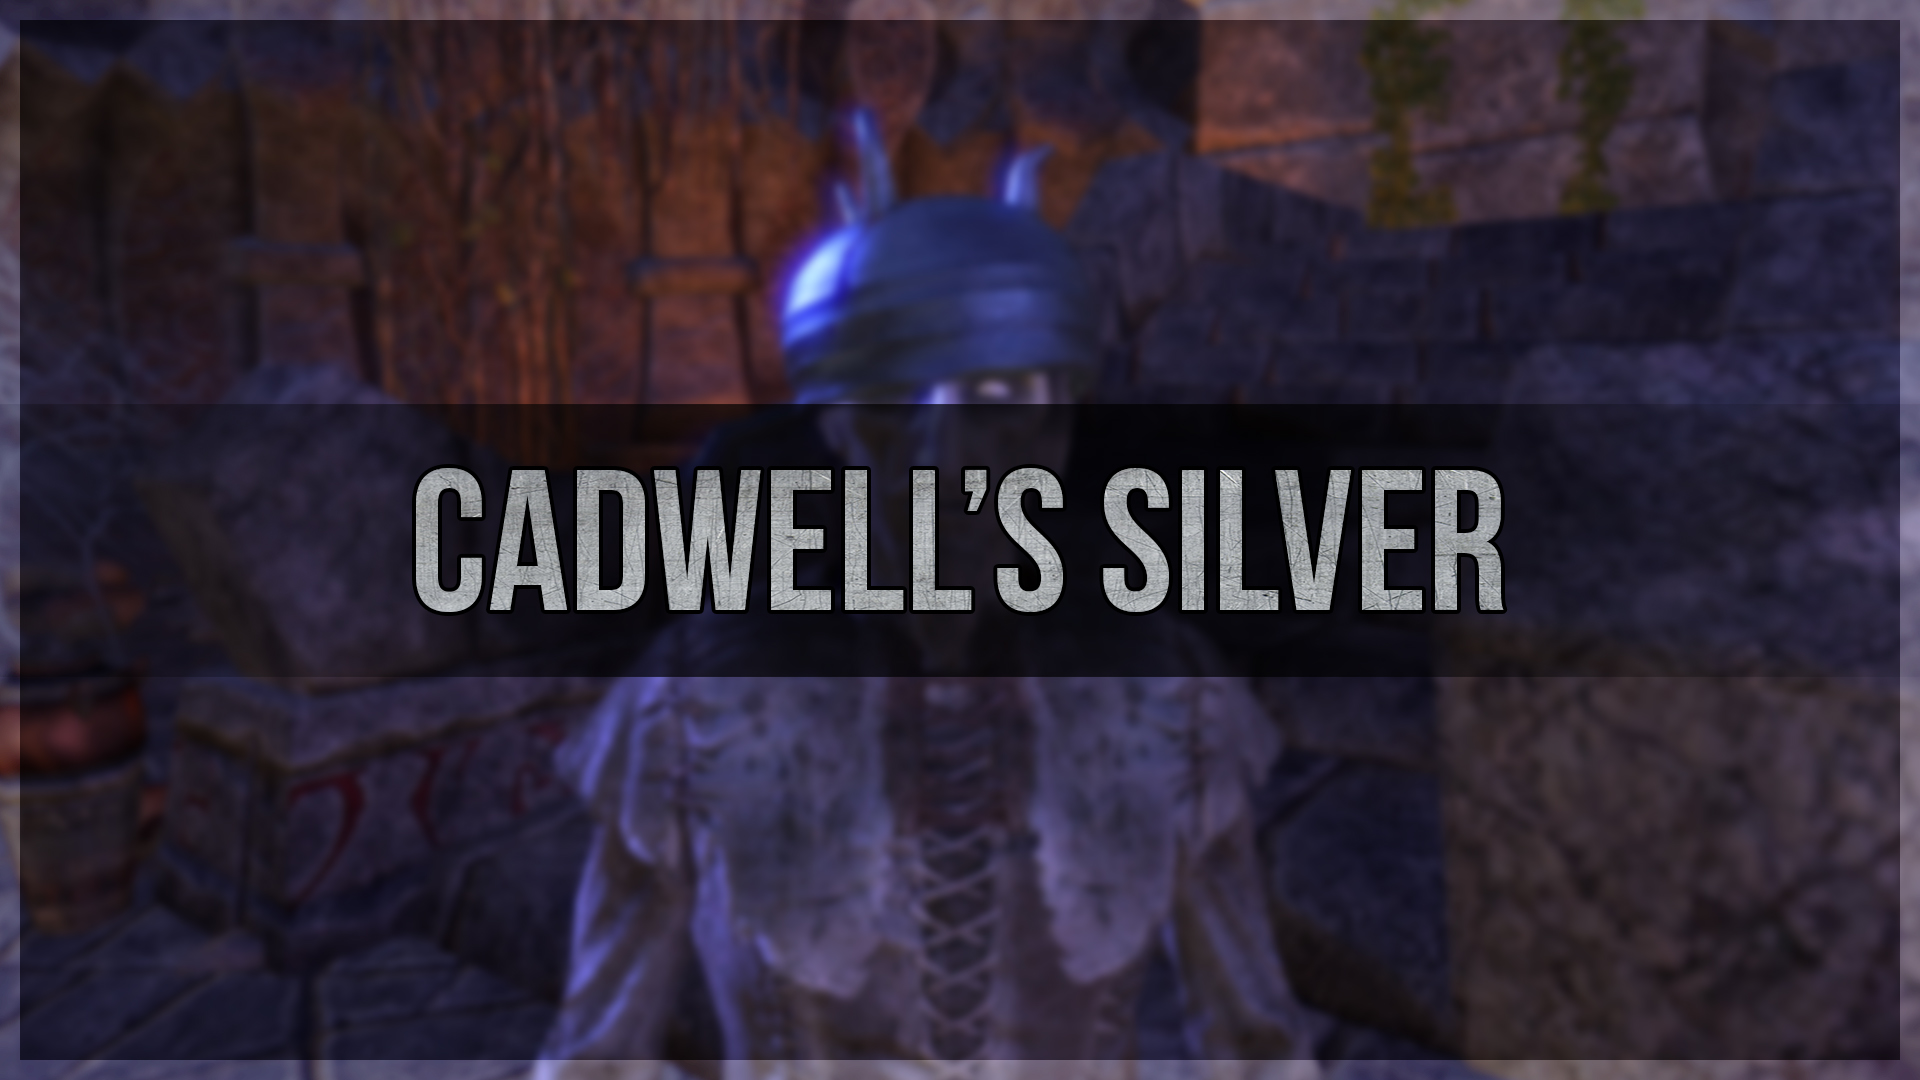 Cadwell's Silver